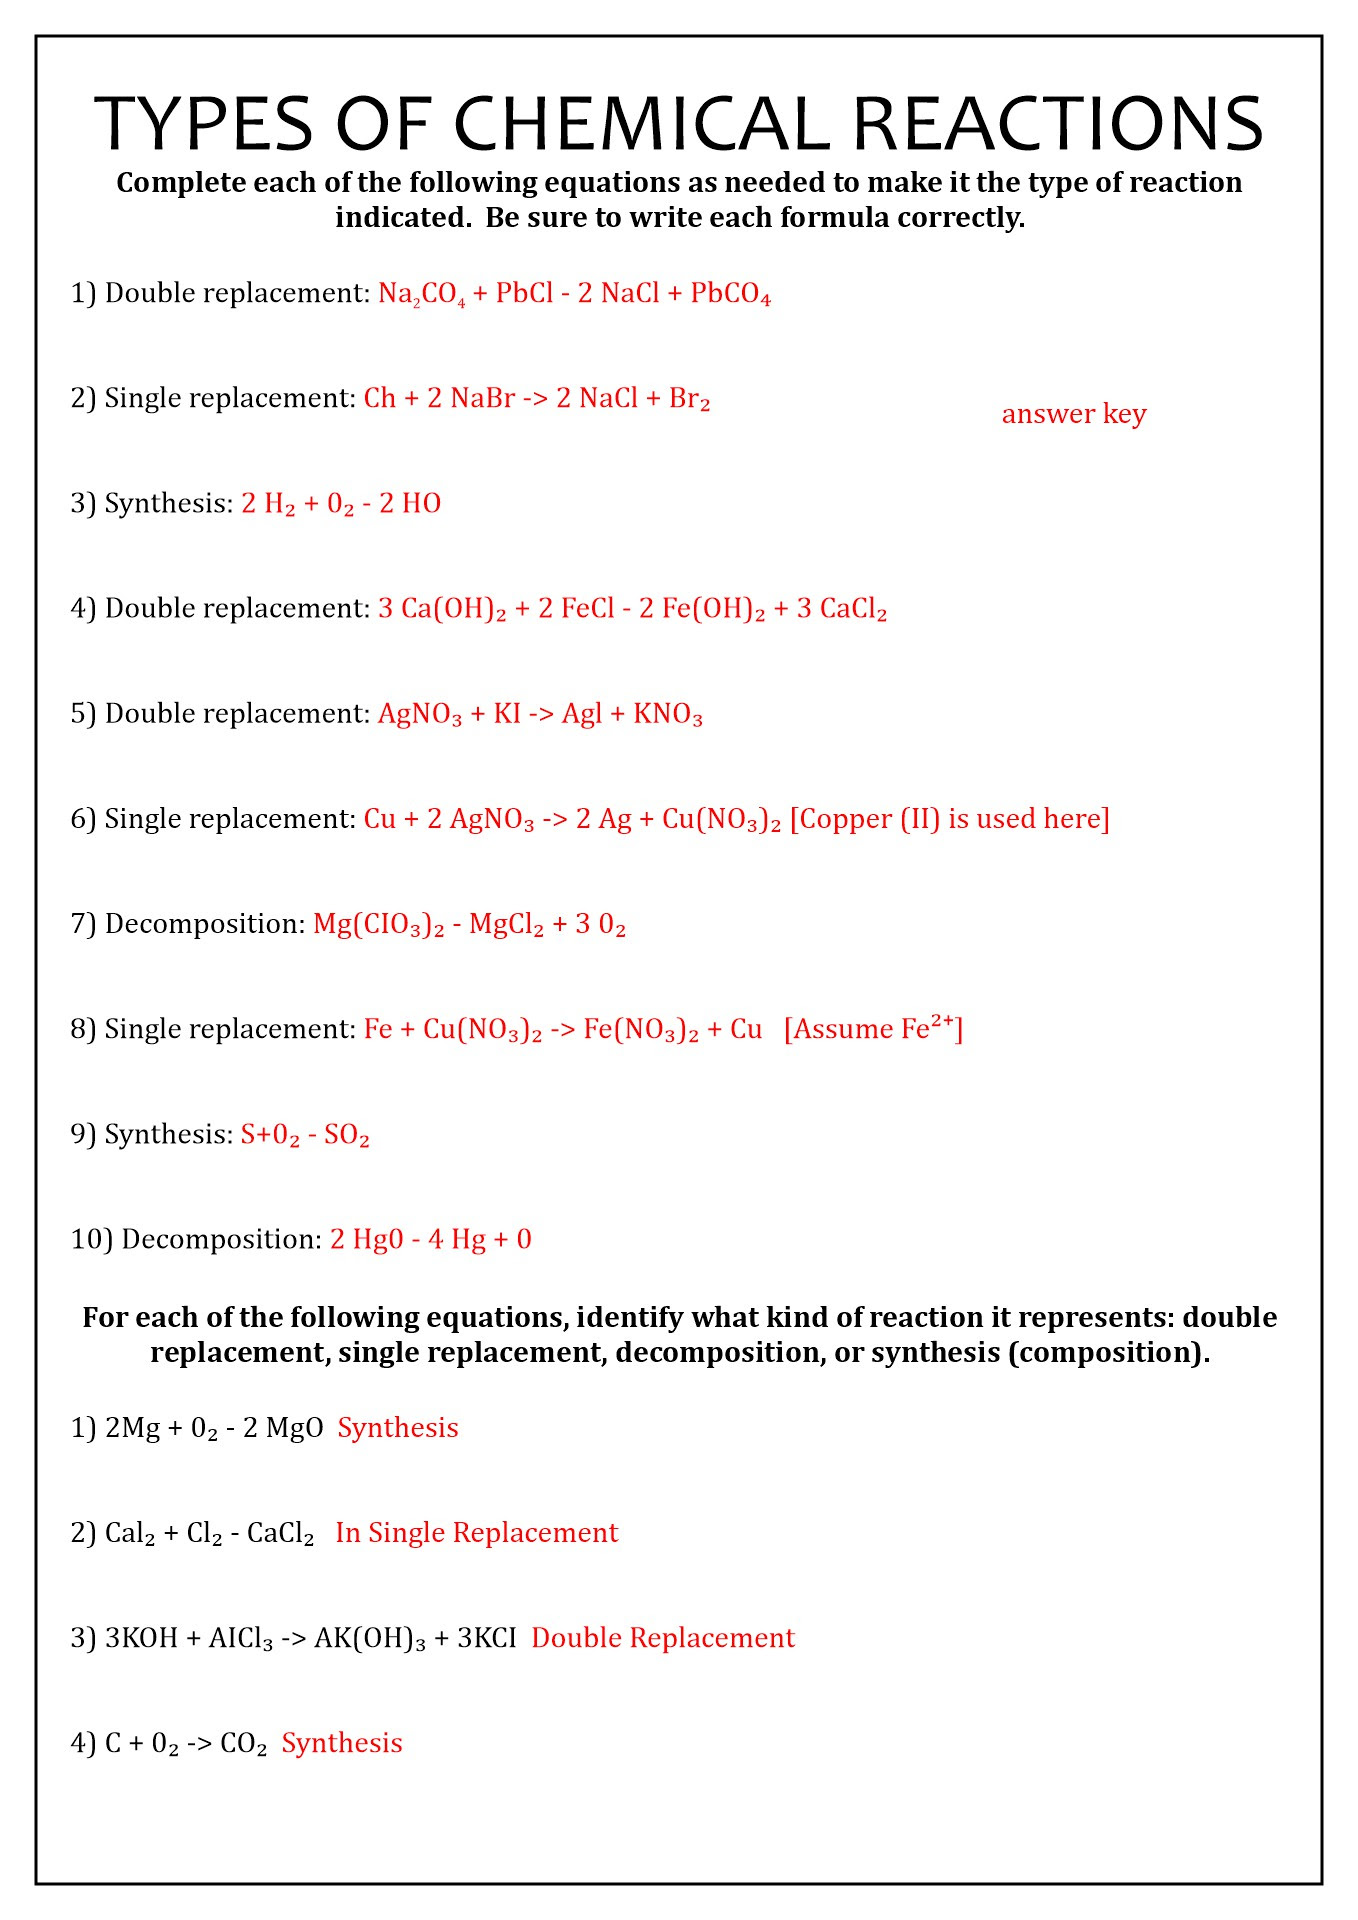 pogil-types-of-chemical-reactions-worksheet-answers-types-of-chemical-reactions-pogil-do-atoms